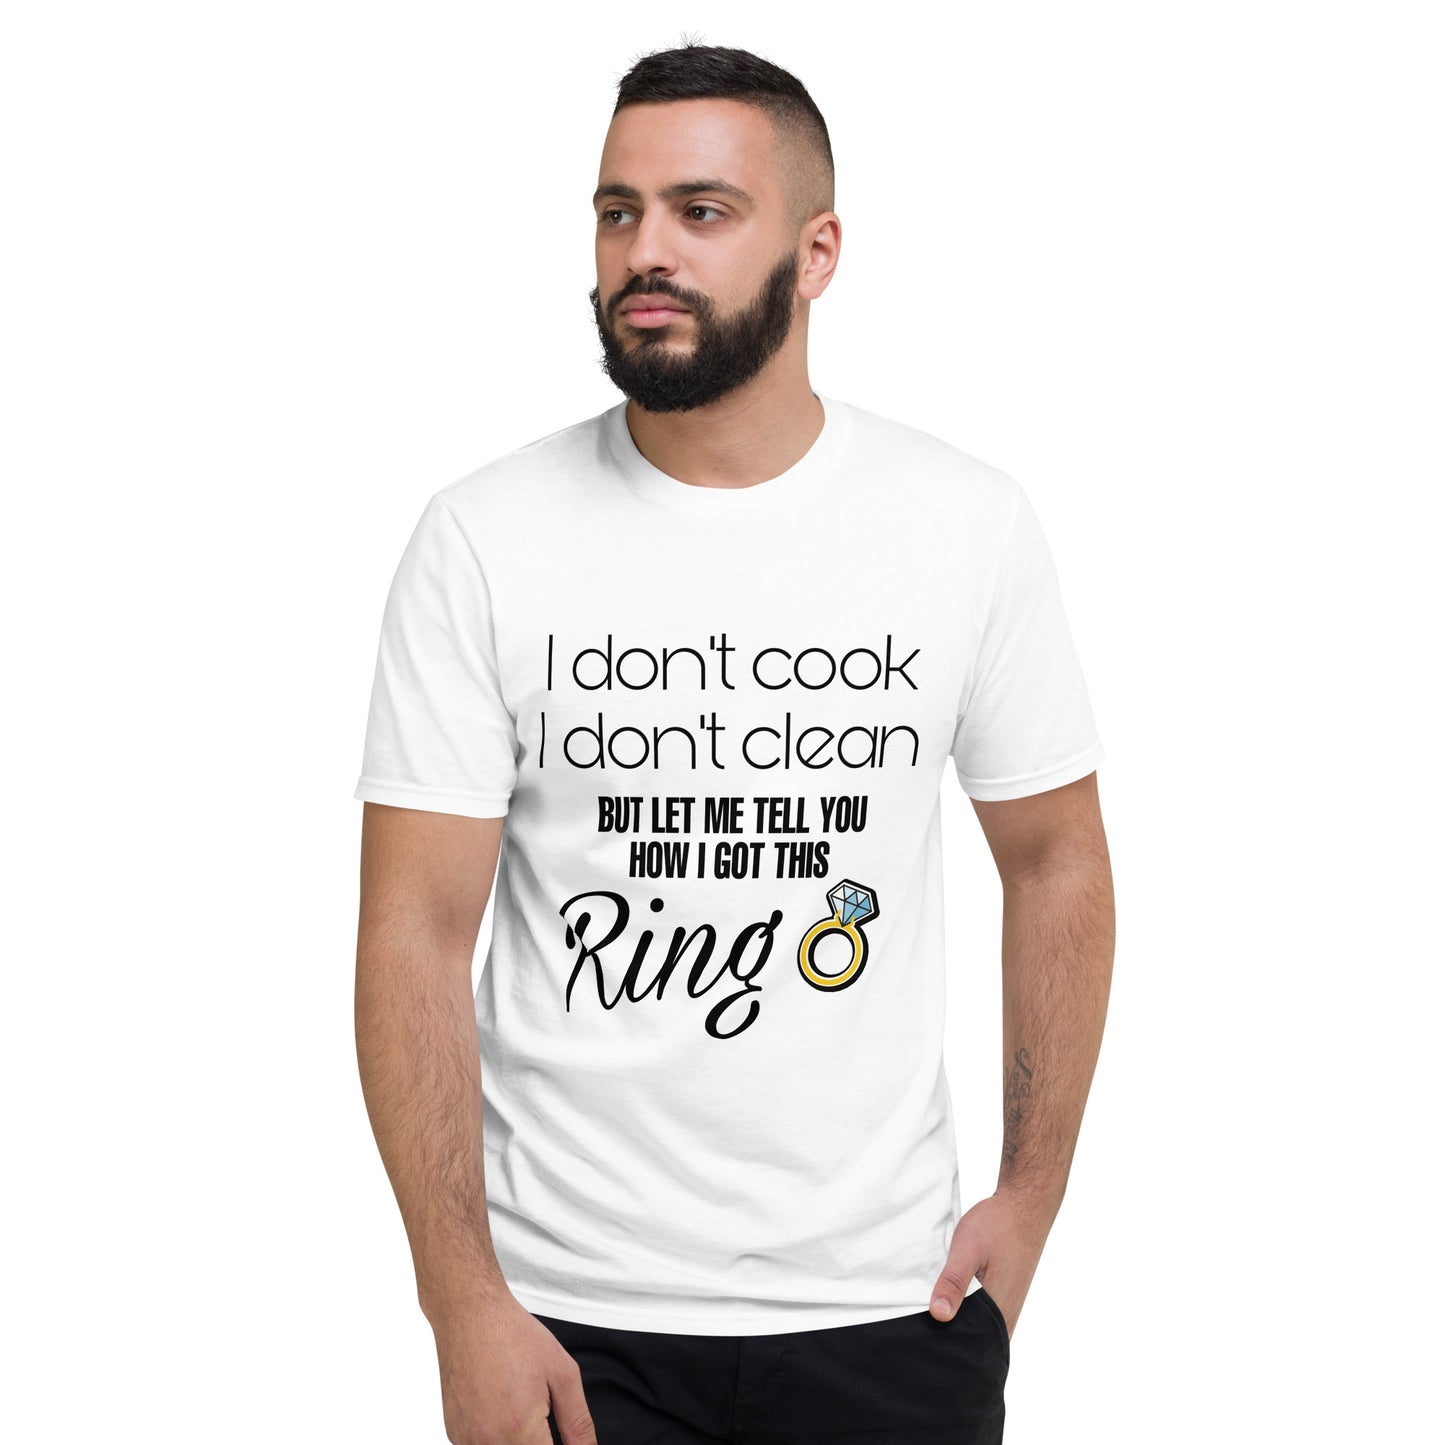 I Don't Cook Short-Sleeve T-Shirt